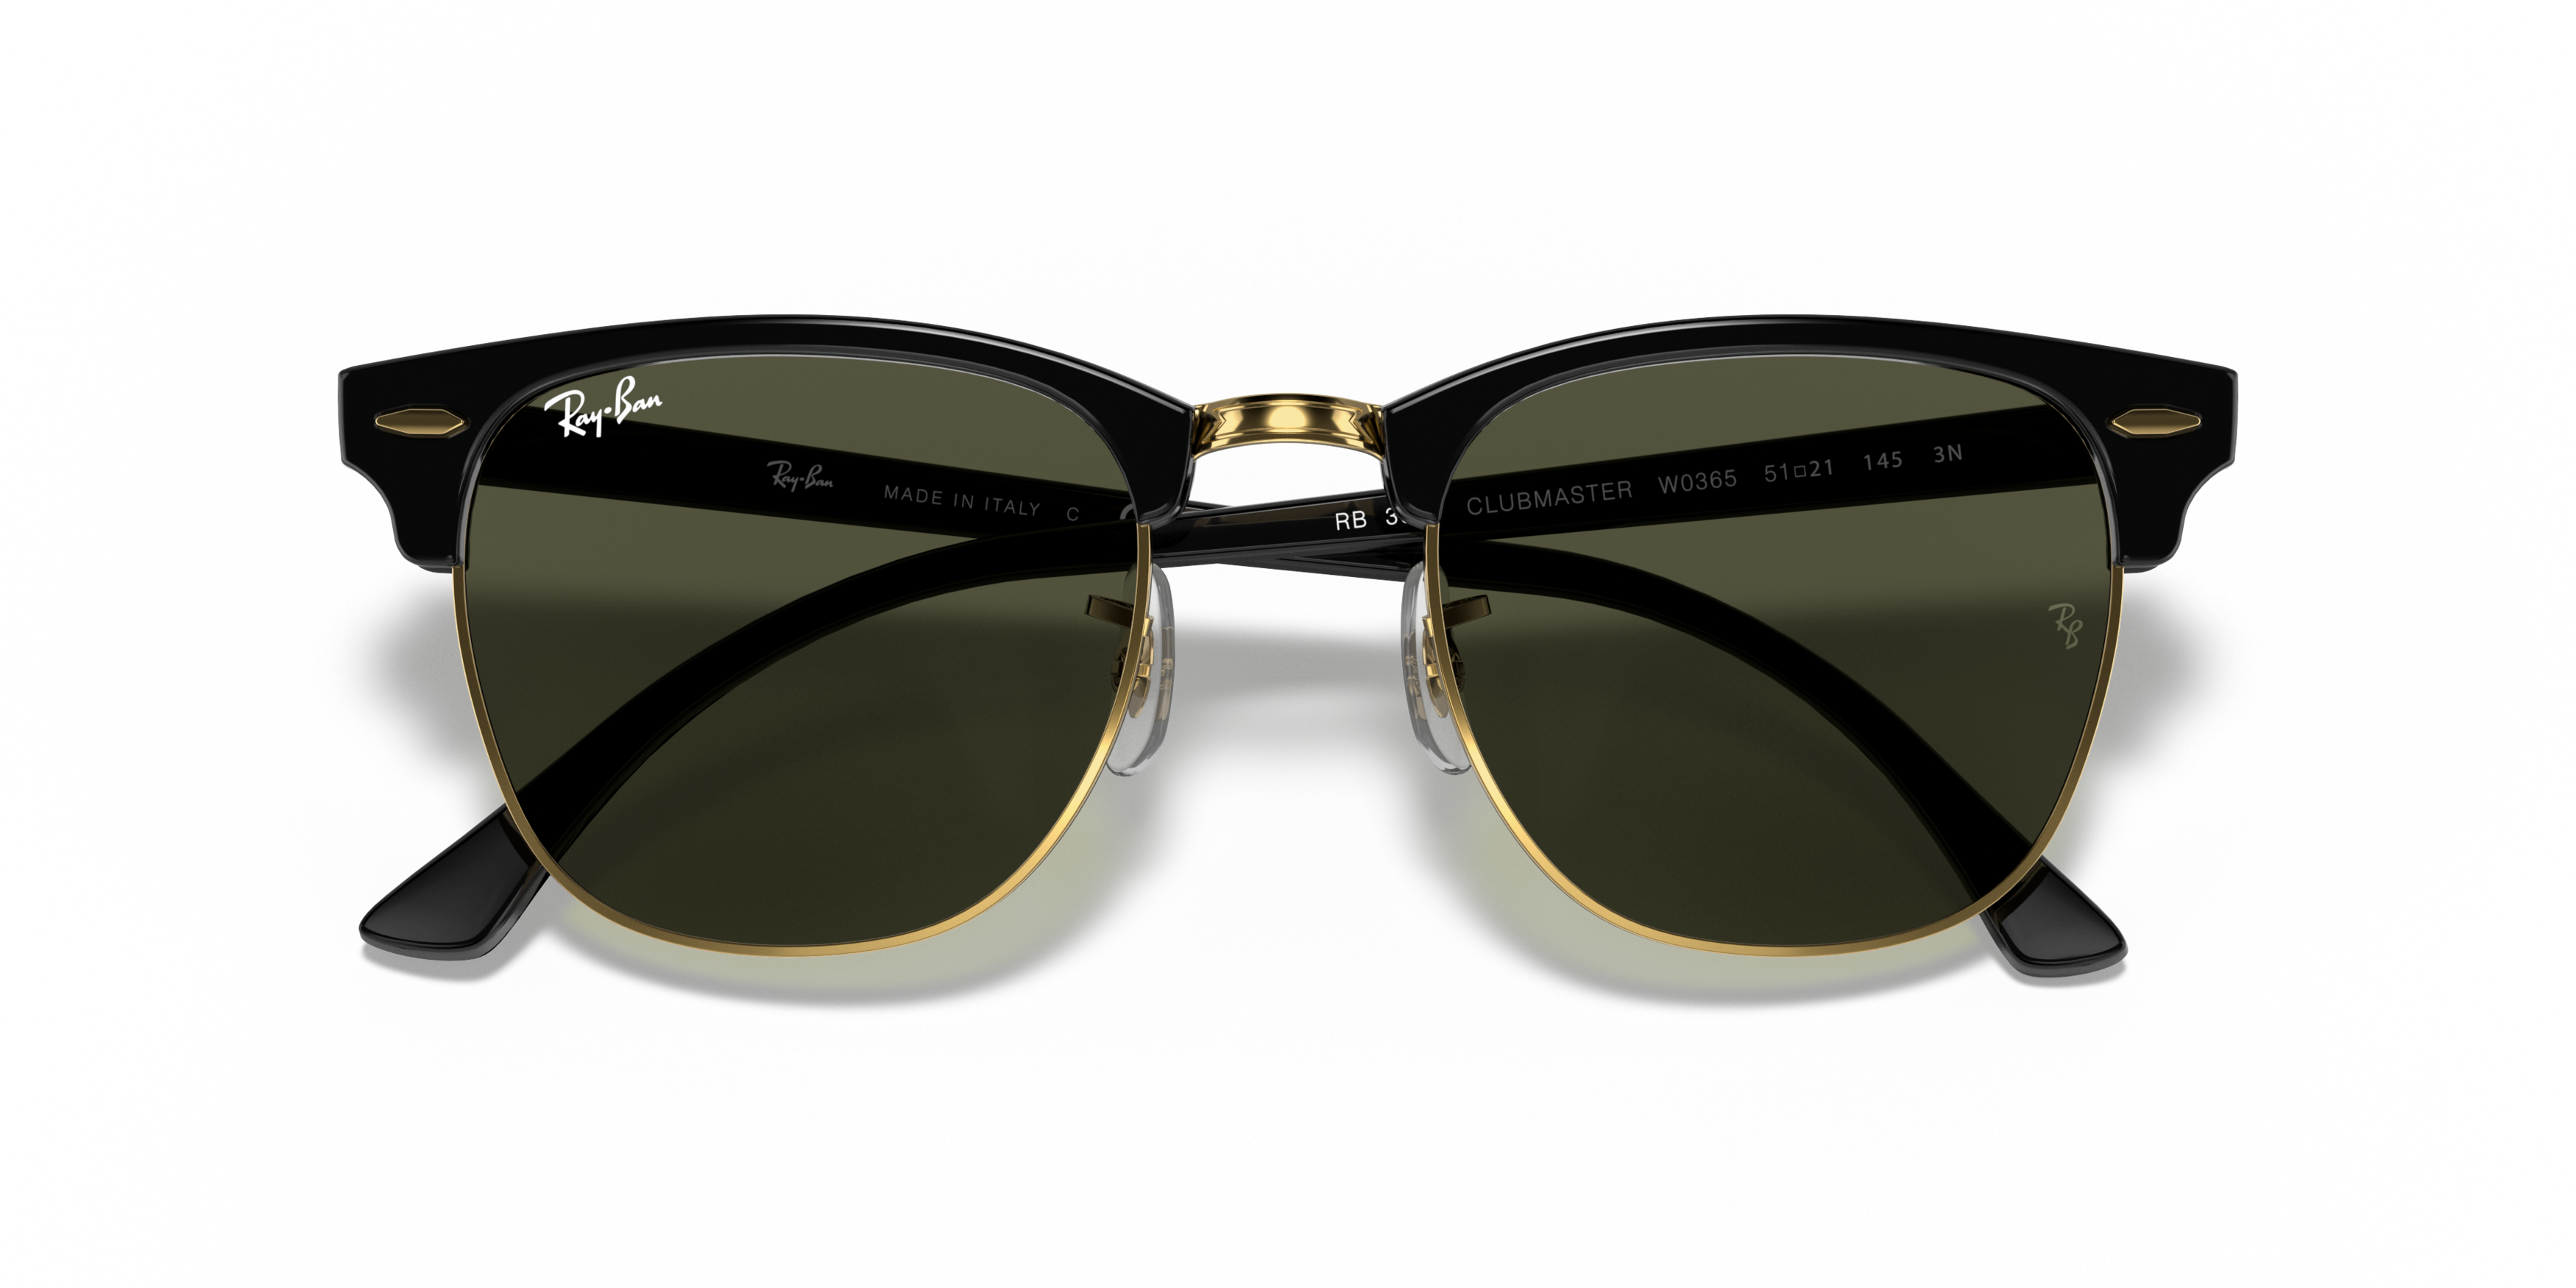 Folded Ray-Ban CLUBMASTER RB3016 W0365-51/21 Verde / Nero,Oro